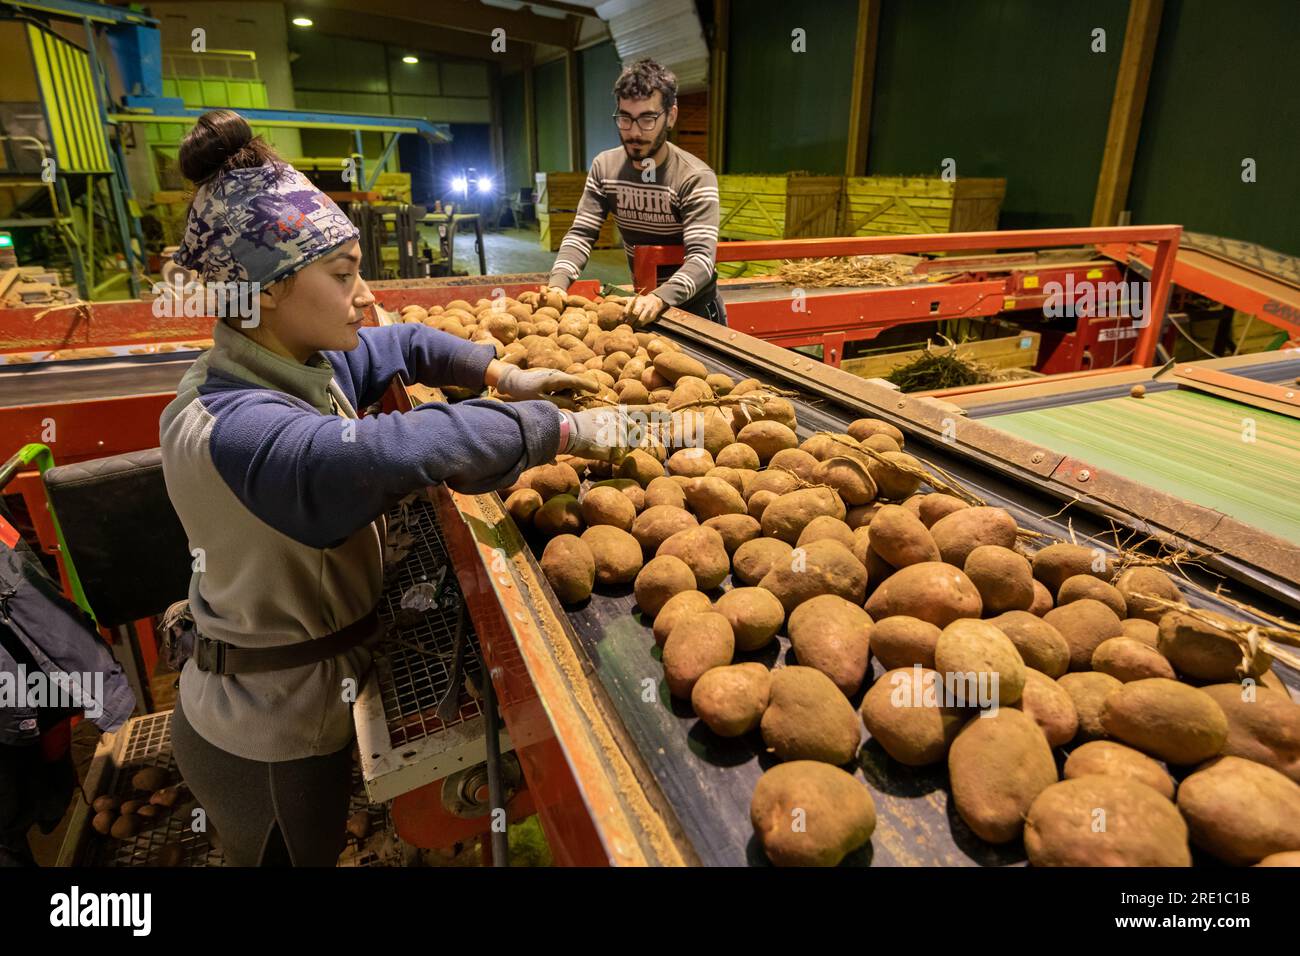 Potato harvesting: agricultural workers sorting potatoes Employees sorting Manitou potatoes, tuber with pinkish red skin. Cold storage Stock Photo